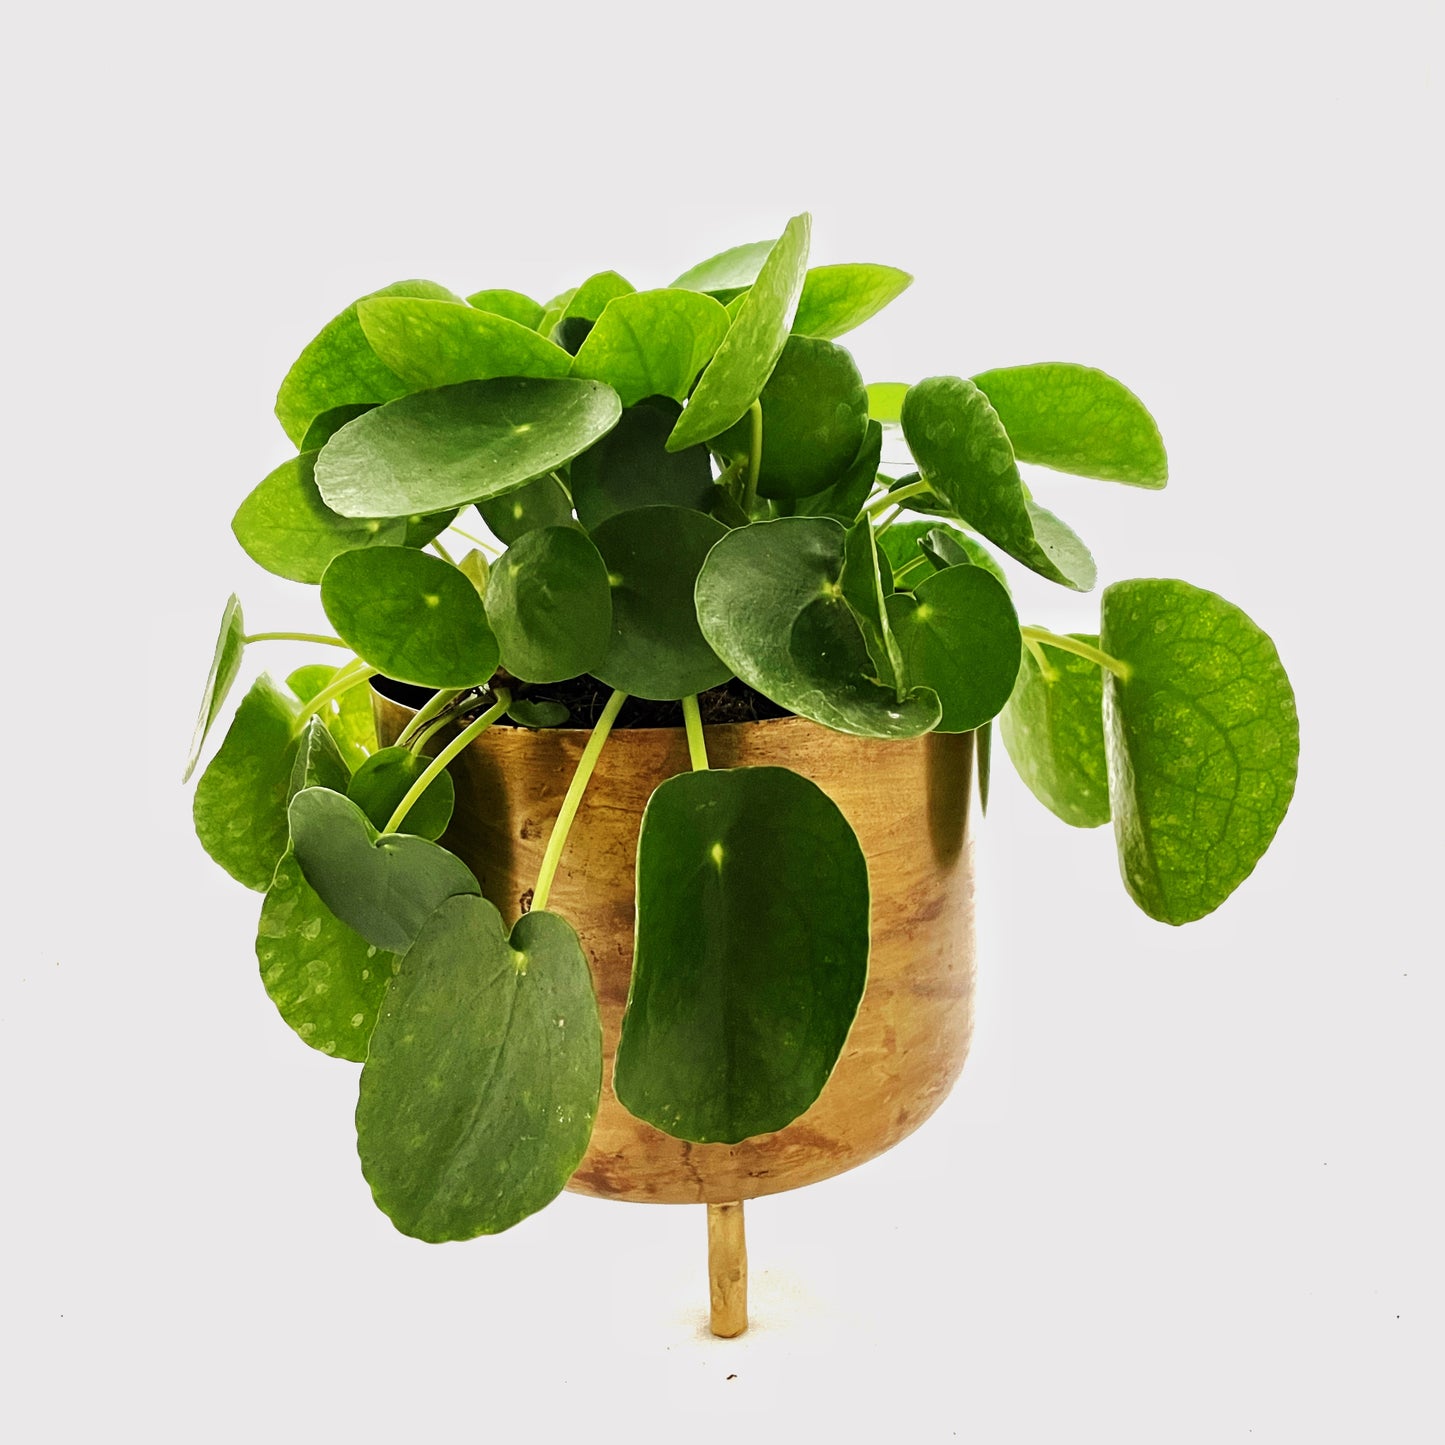 Pilea peperomioides - Chinese Money Plant